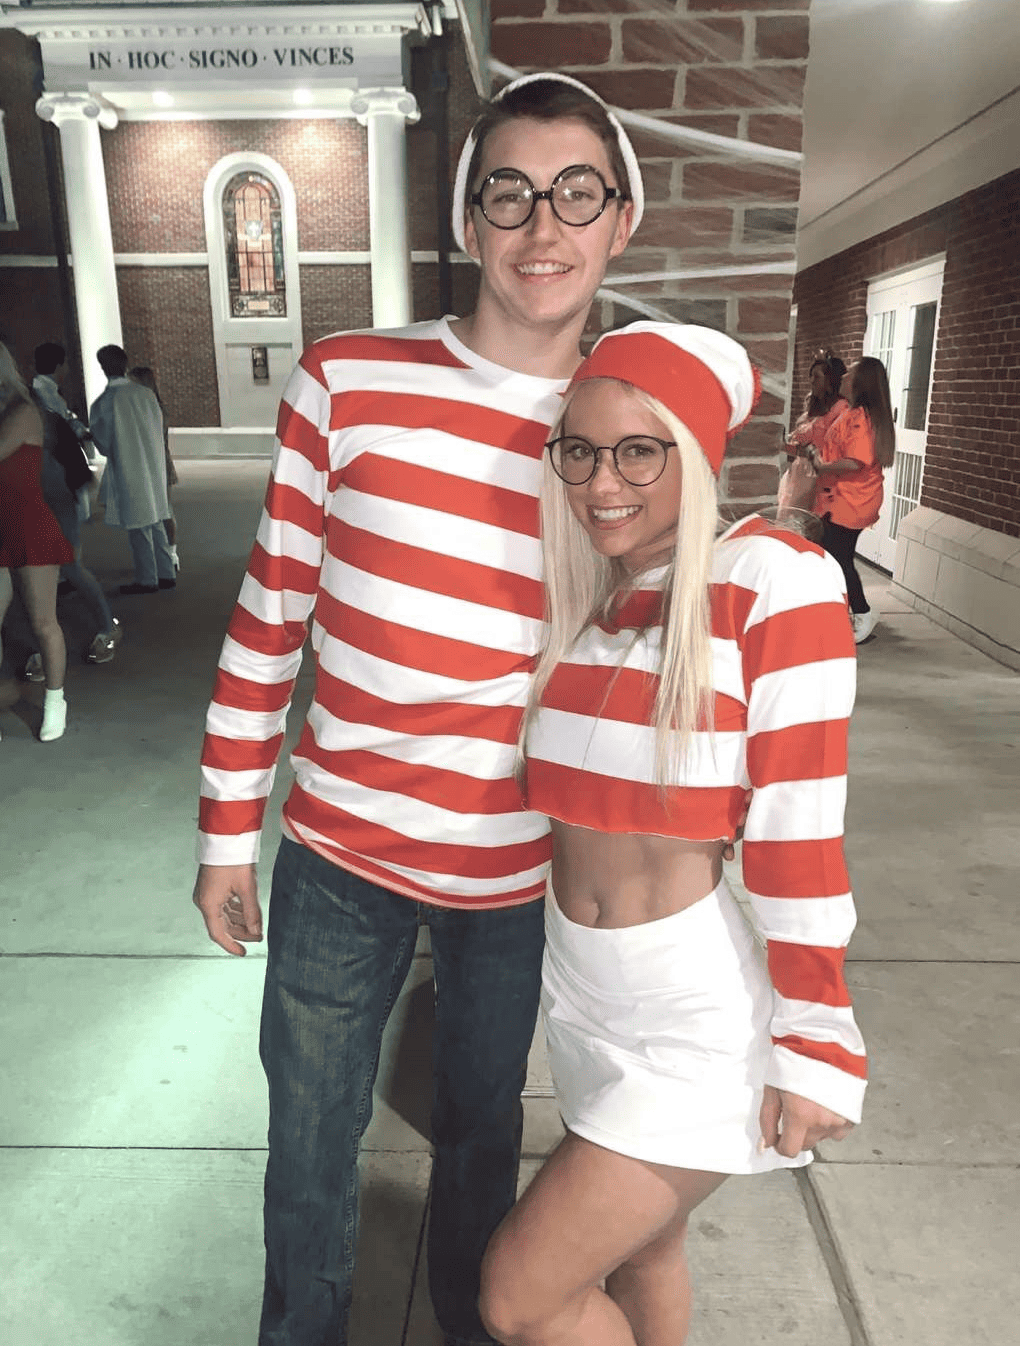 36 Insanely Good Halloween Costumes for Guys - By Sophia Lee